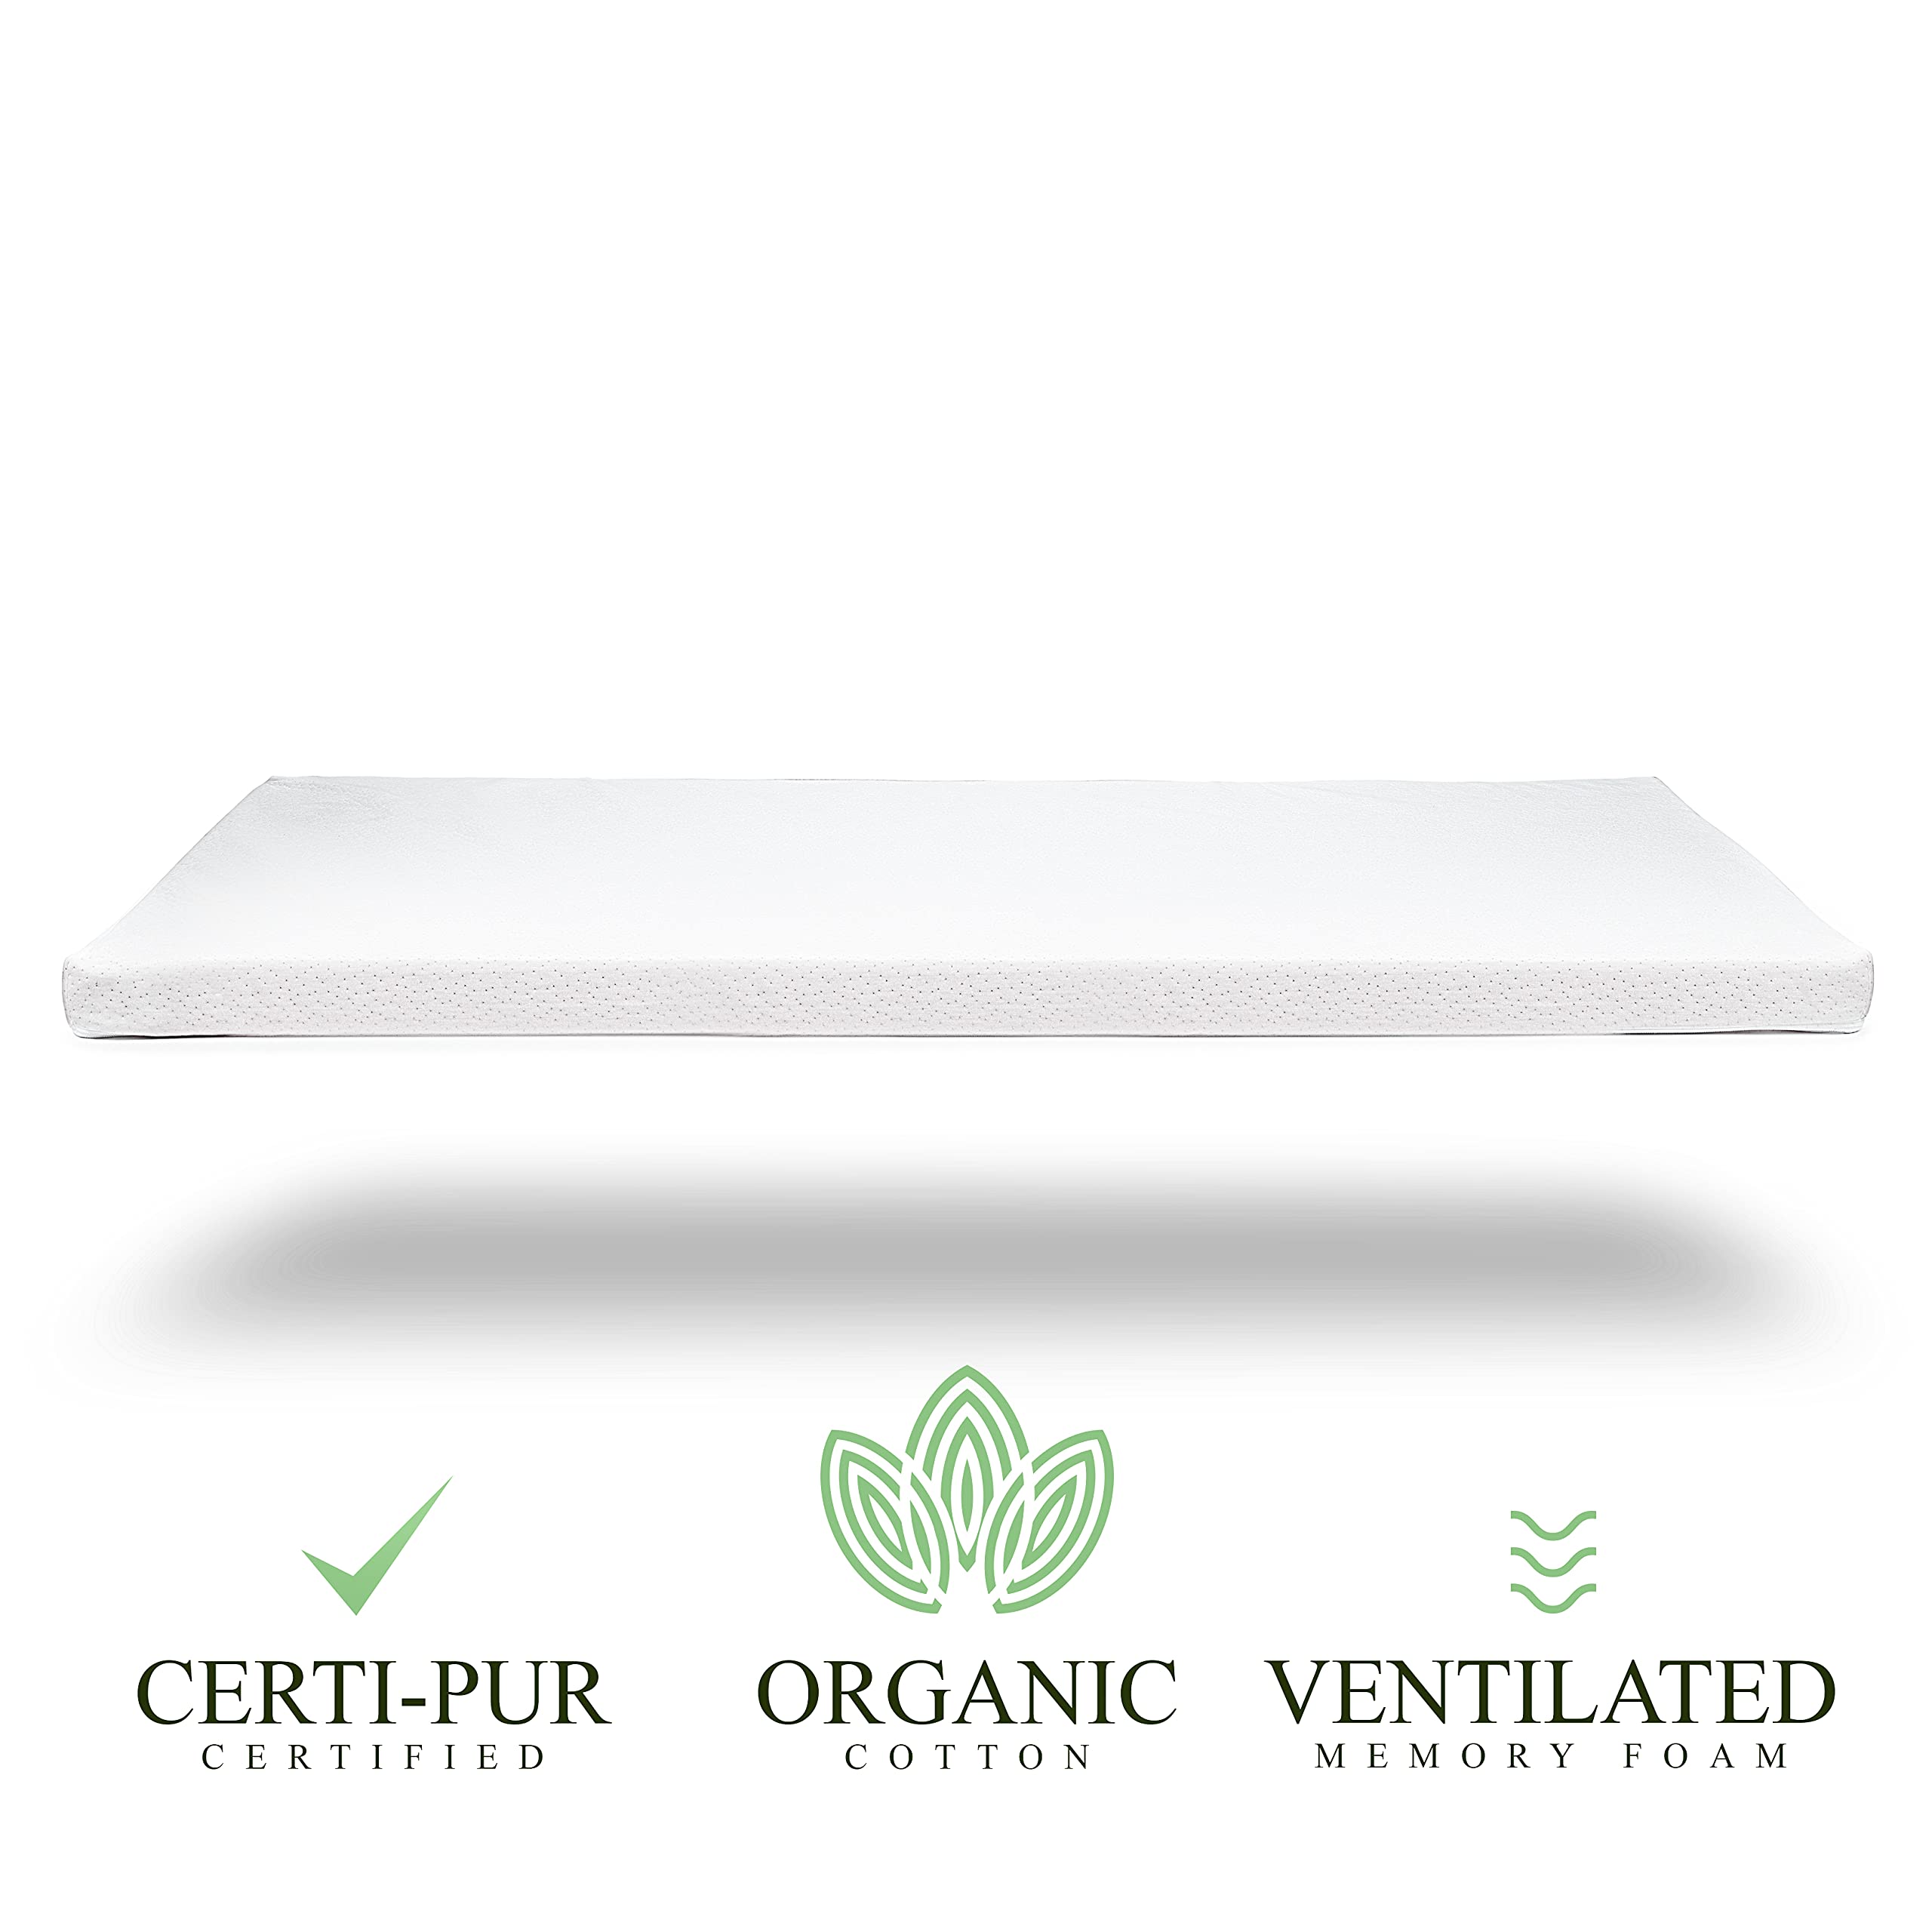 Organic Cotton Crib Topper | Ventilated 2-Inch Memory Foam CertiPUR-US Mattress Topper Pad, Waterproof & Washable Cover for Baby Crib & Toddler Bed Soft Padding, Nonslip Bottom, Travel Strap, 52x27x2  - Very Good